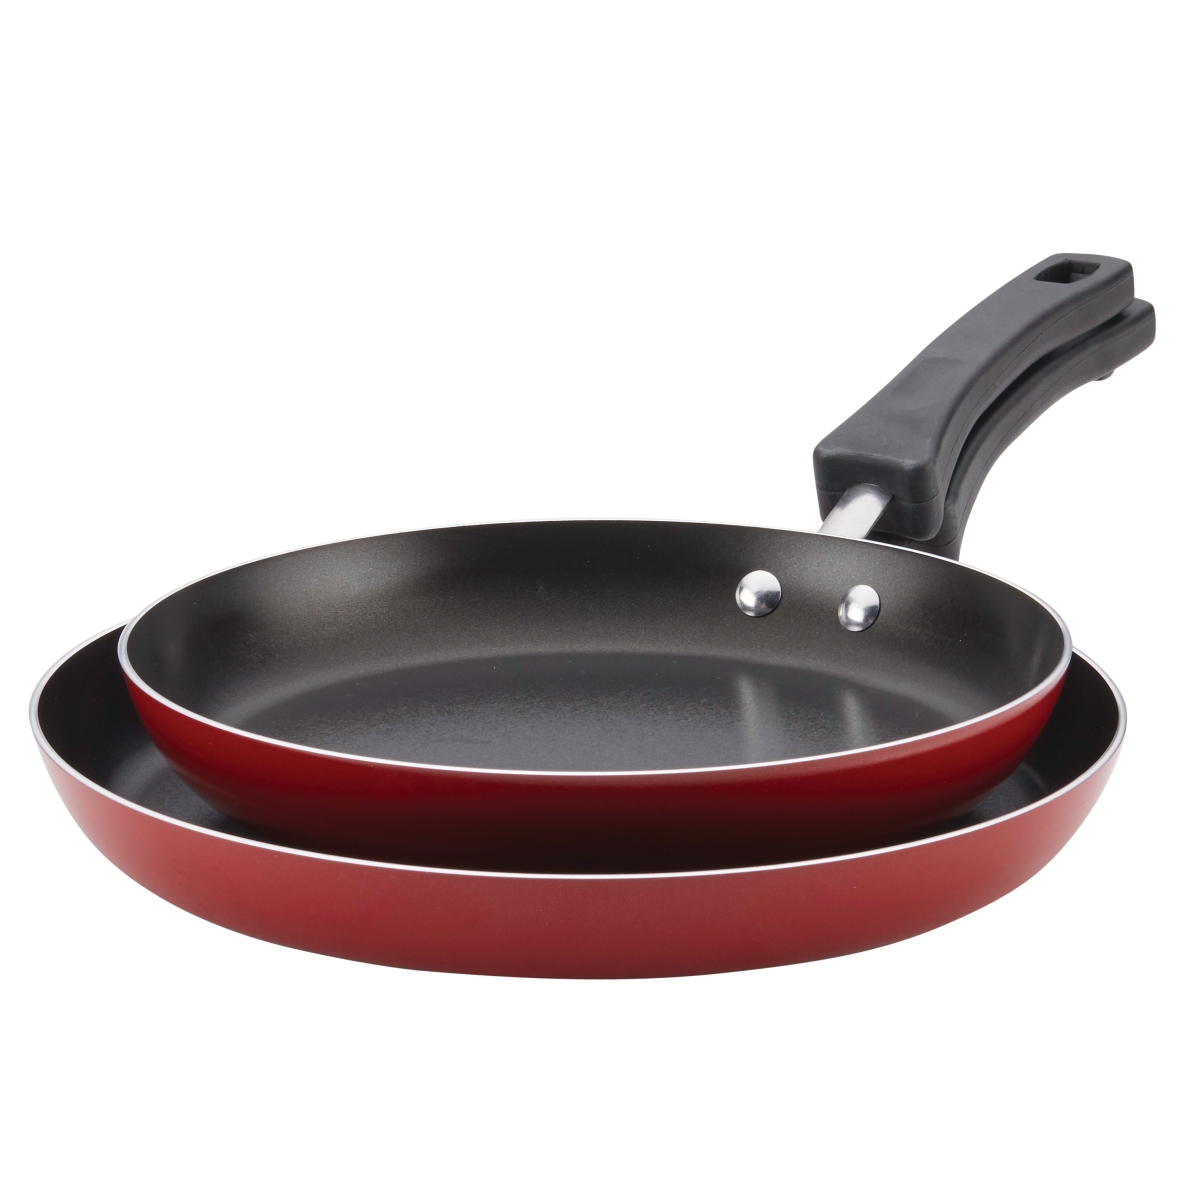 20370 Neat Nest Space Saving Aluminum Nonstick Skillet - Pack Of 2, Red